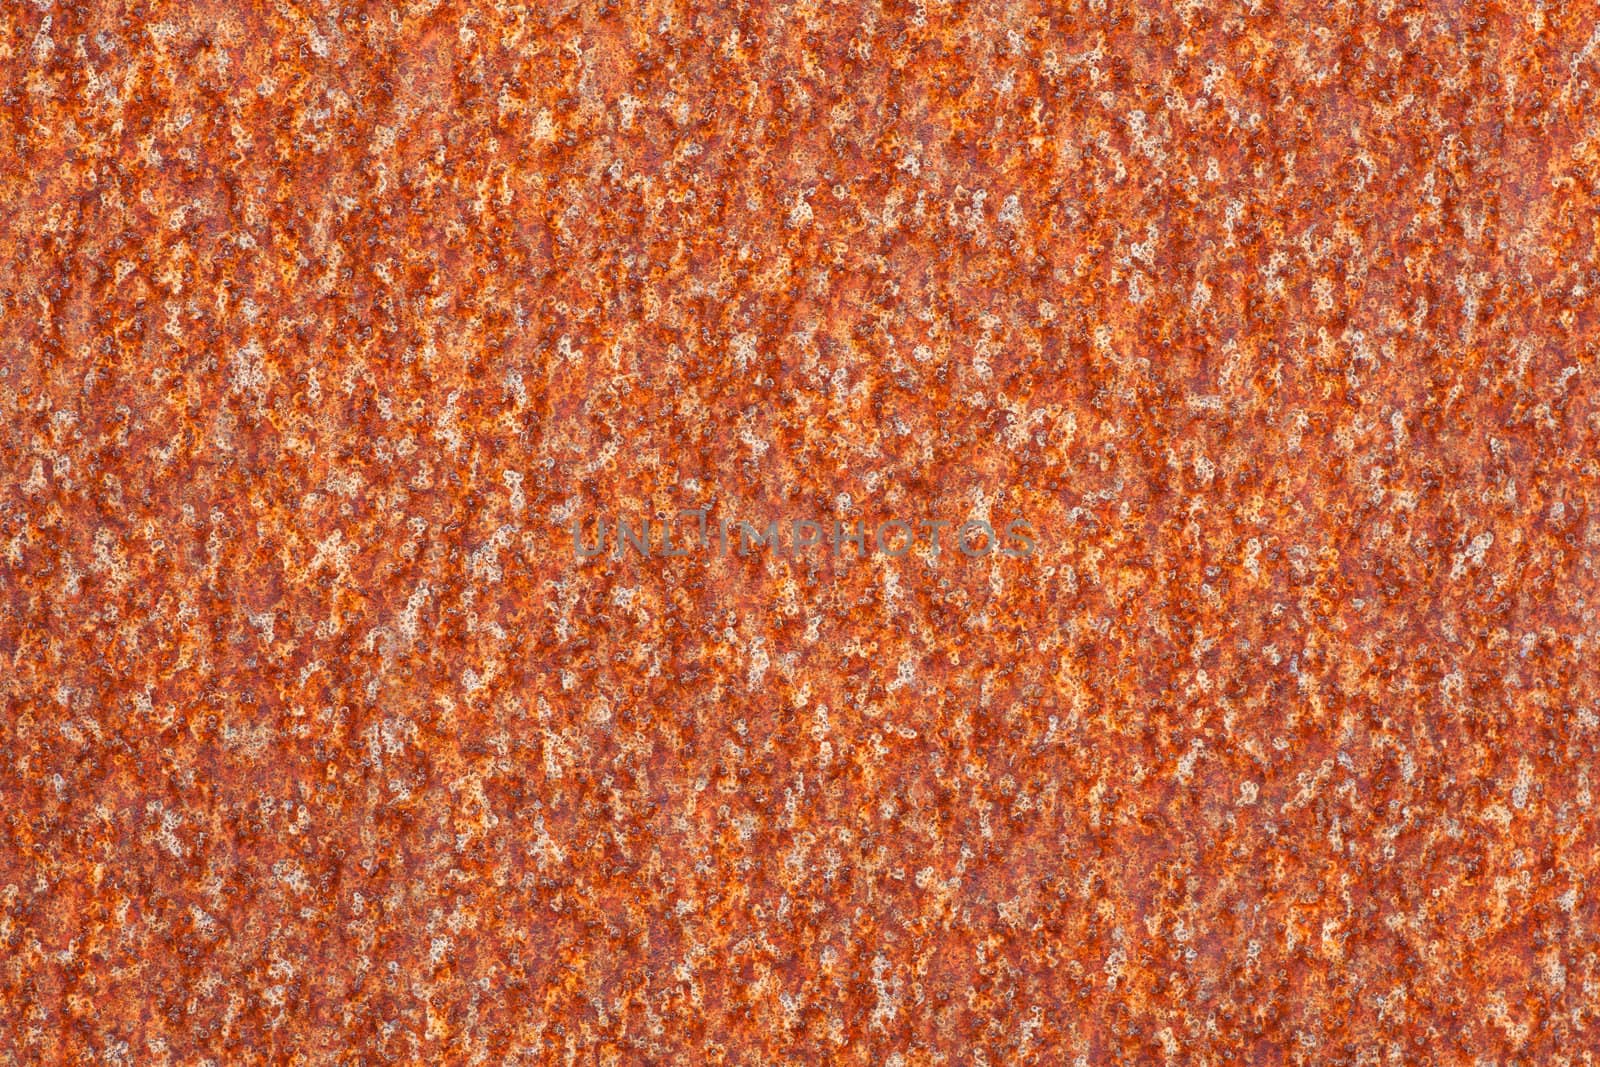 rusted iron plate in orange red and brown